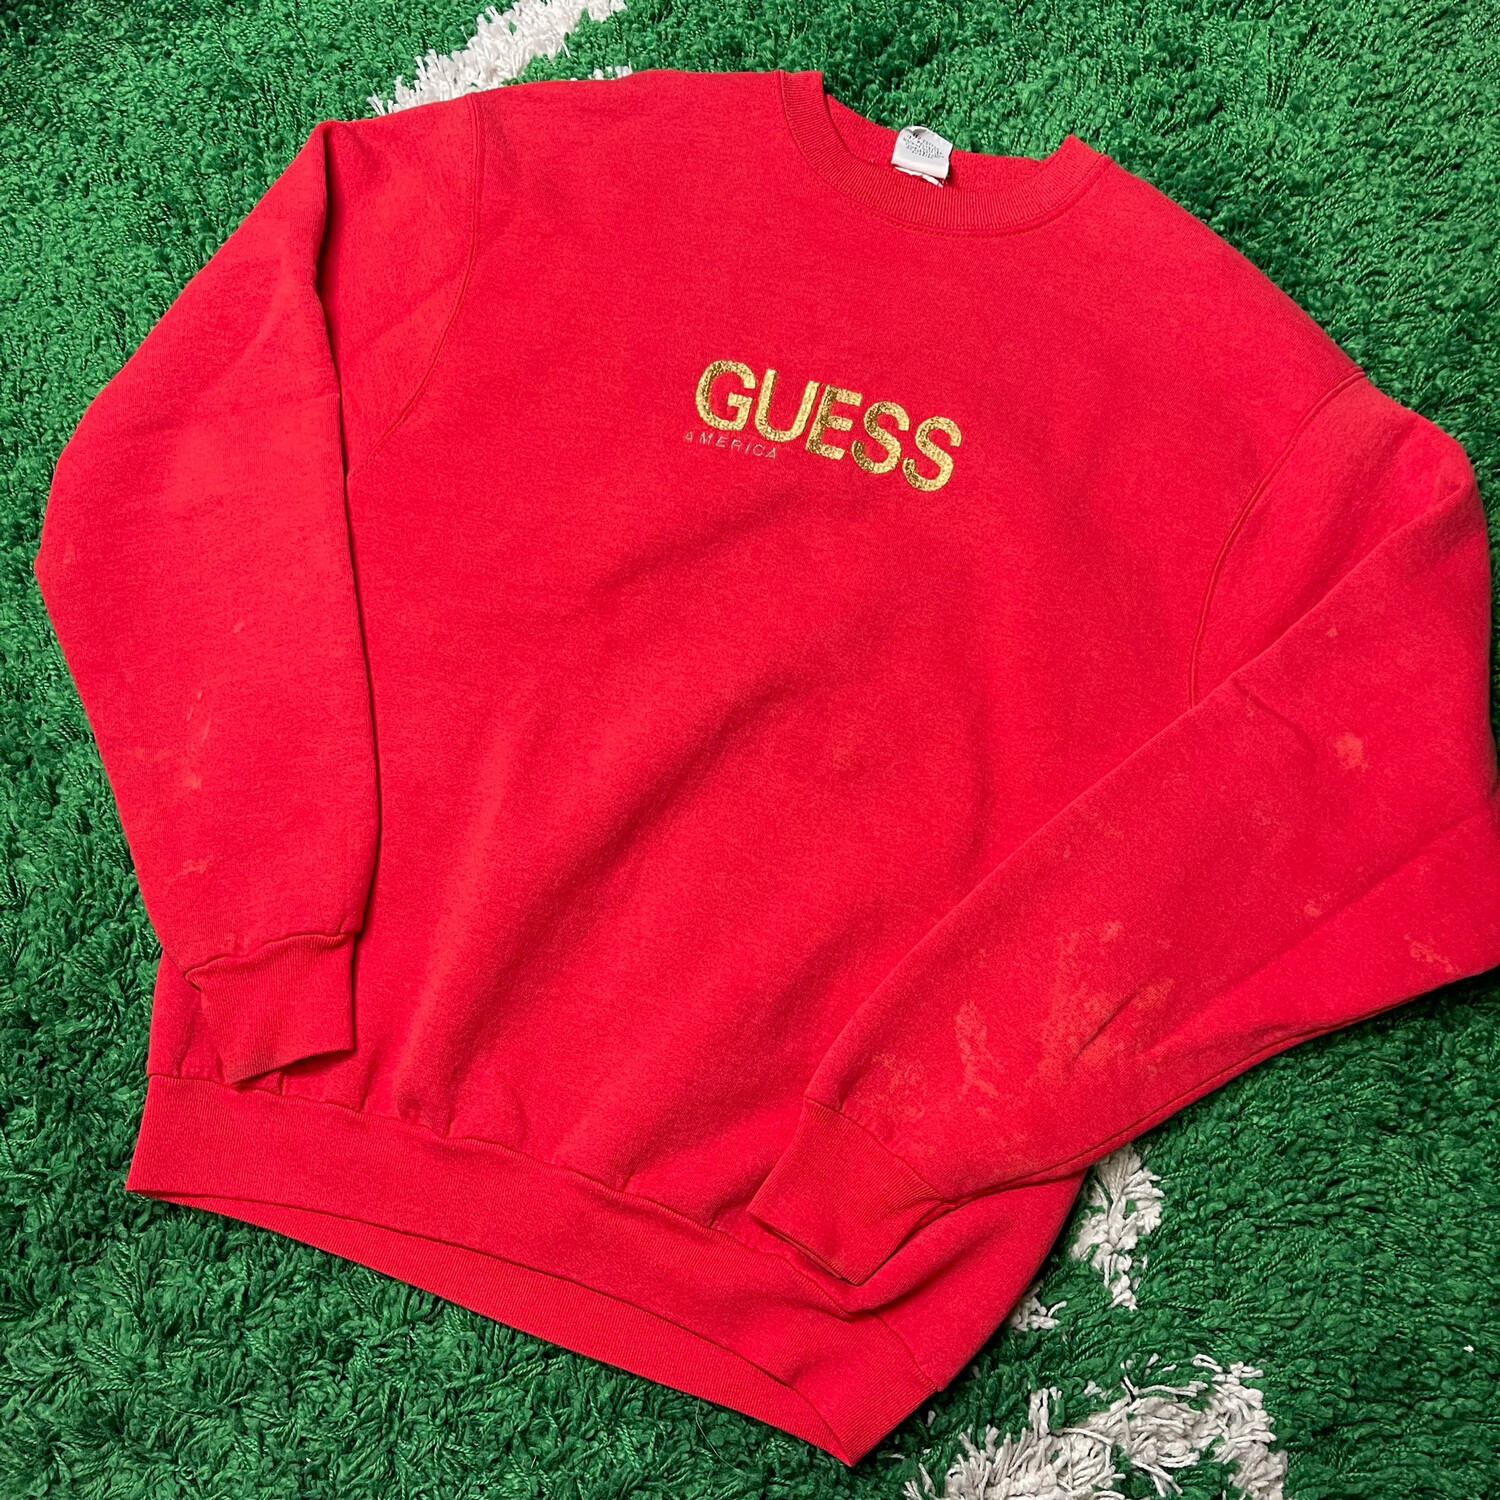 Guess America Red Gold Crewneck Size Large